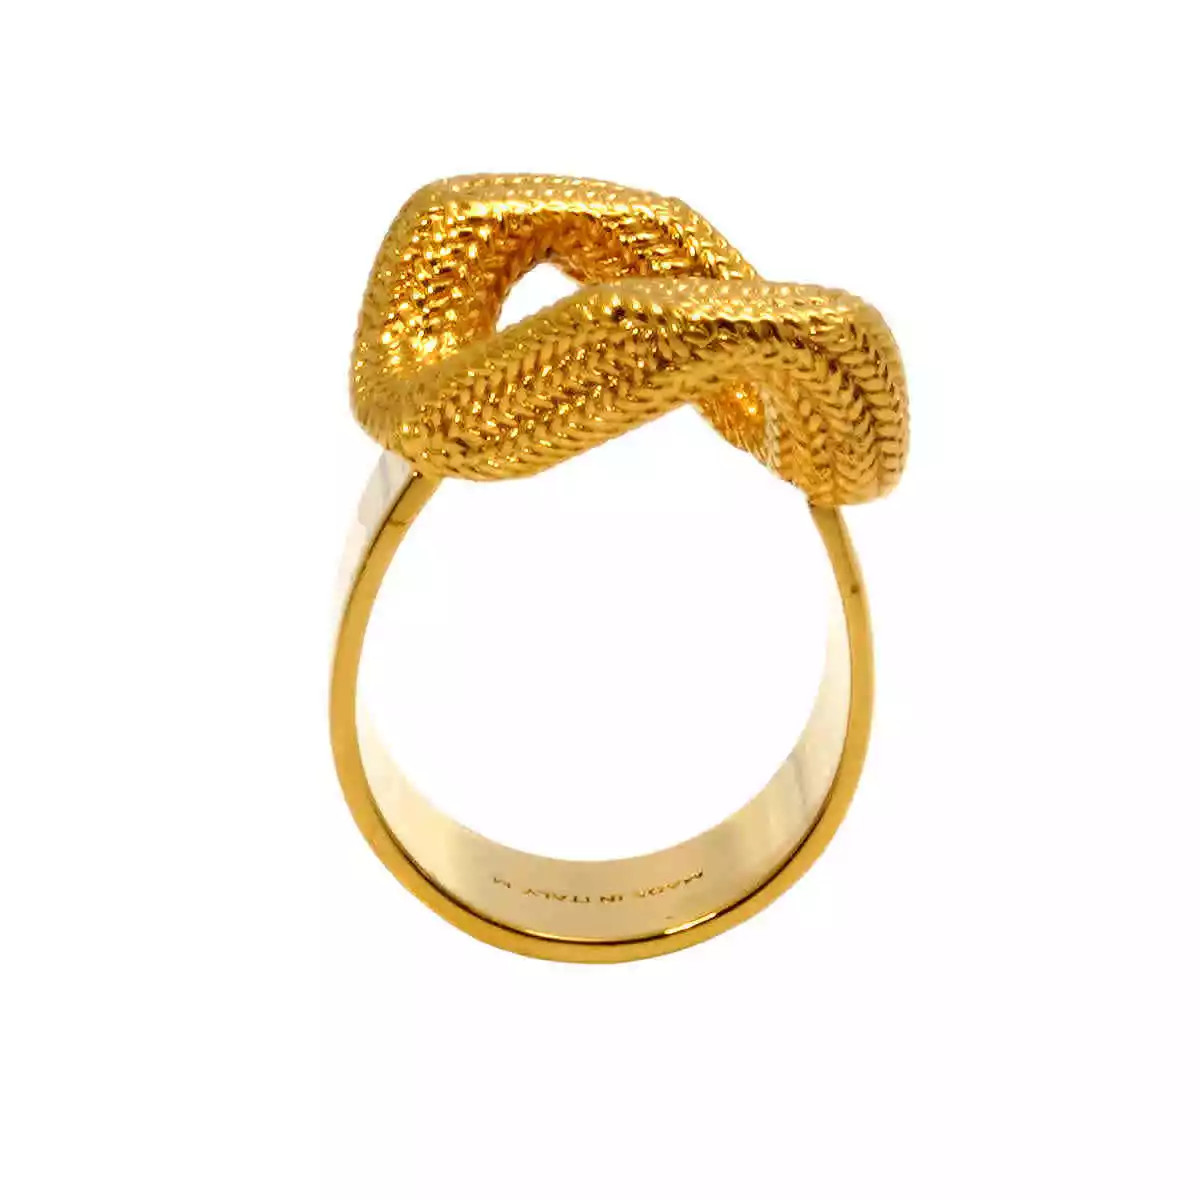 Burberry Light Gold Gold-plated Chain-link Ring